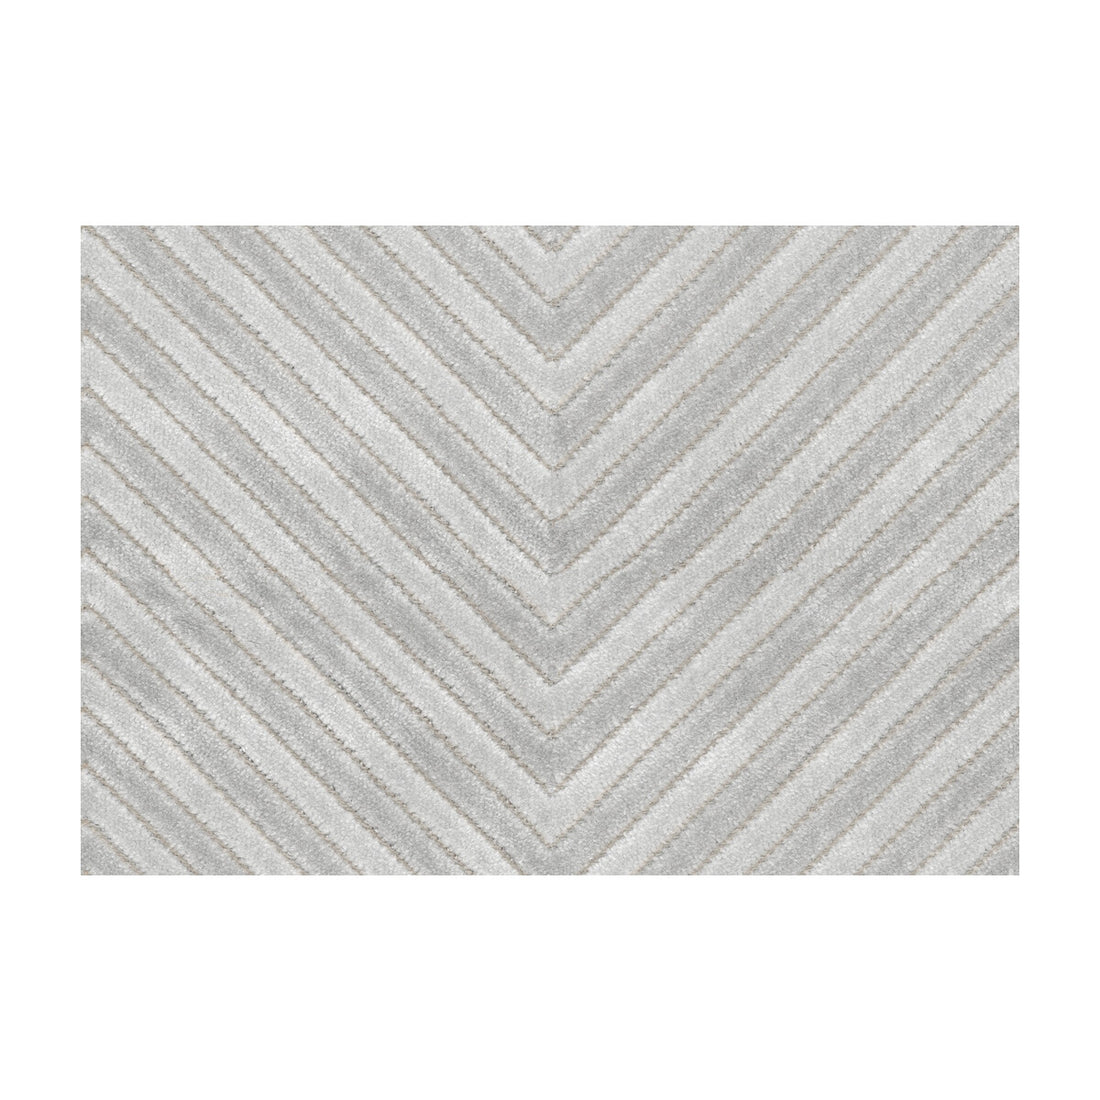 Wishbone fabric in silver color - pattern 36041.11.0 - by Kravet Contract in the Sarah Richardson Harmony collection